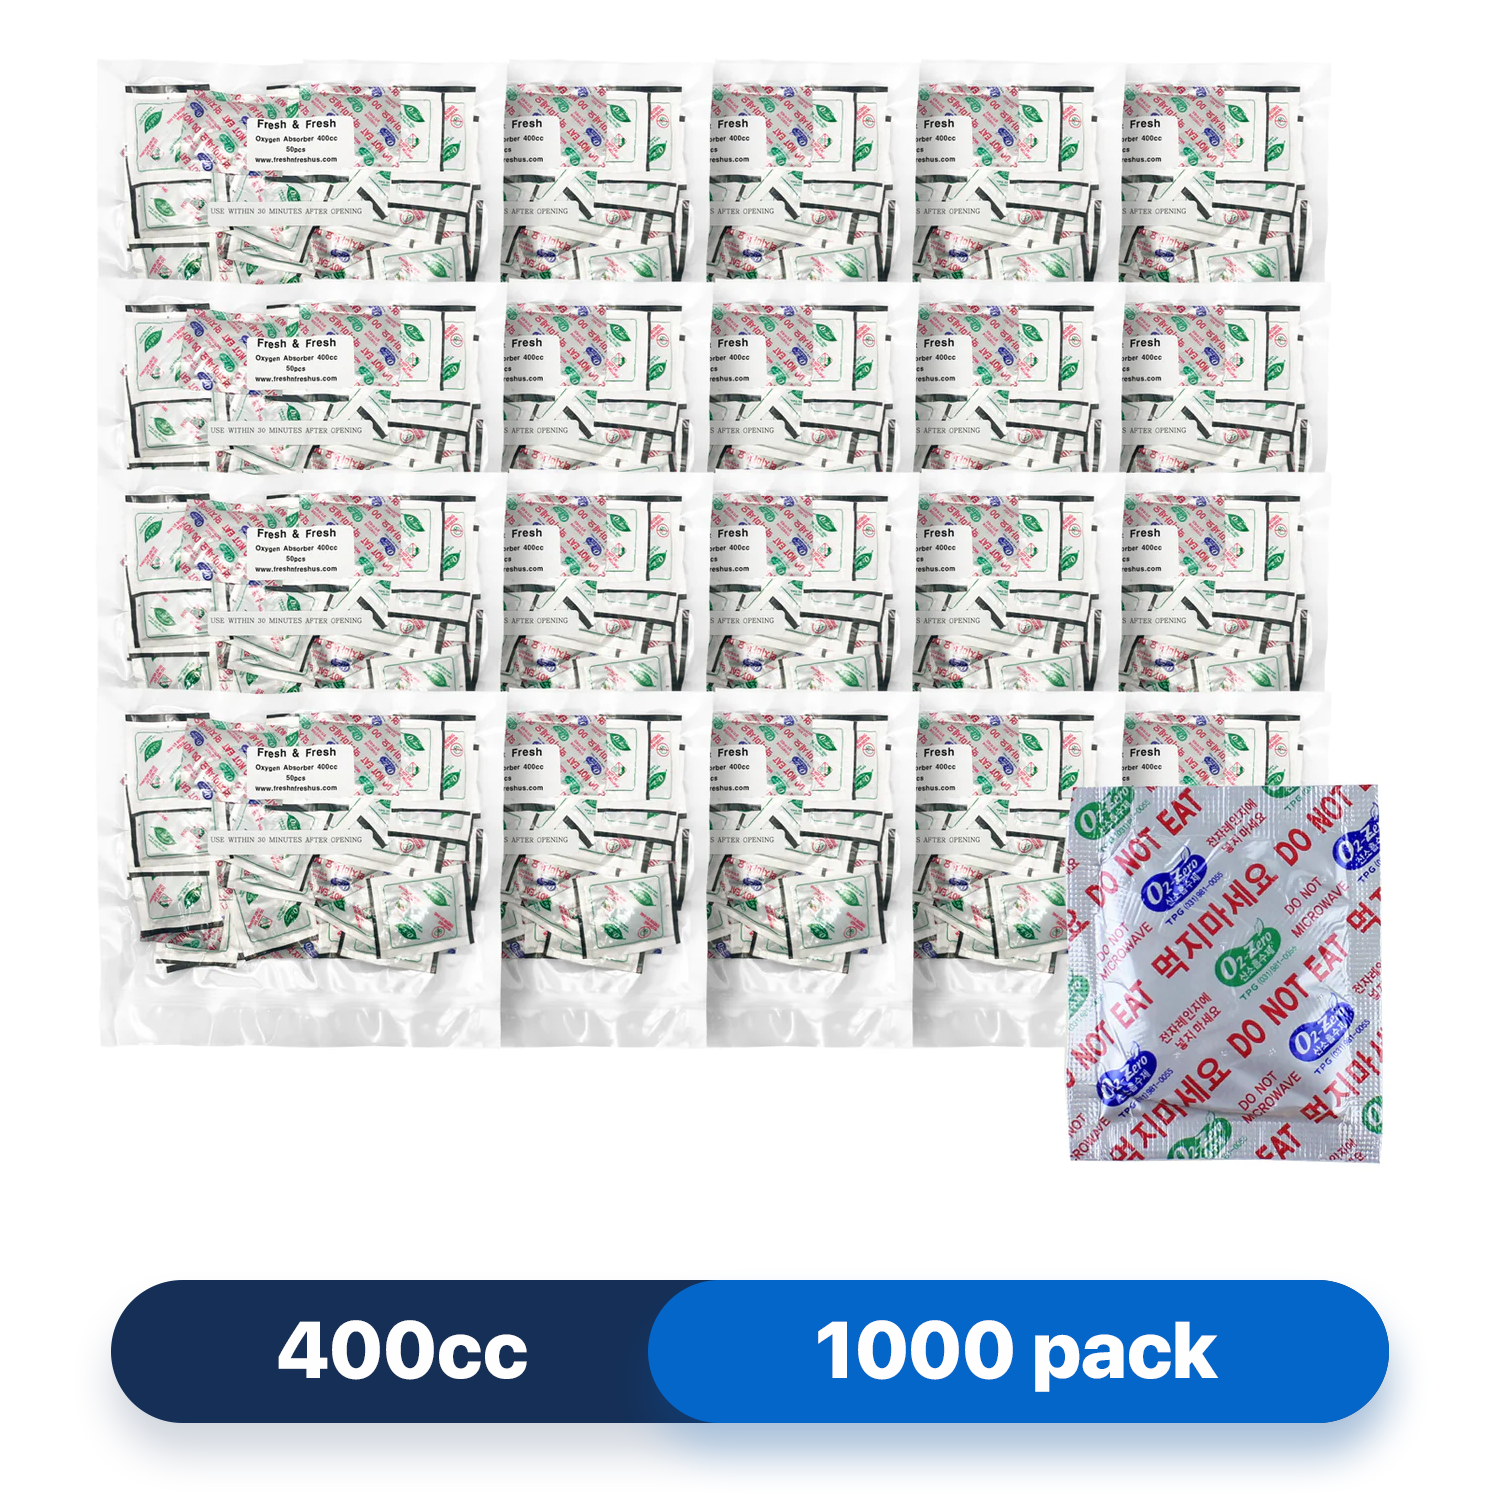 Fresh & Fresh (1000 Packs) 400 CC Premium Oxygen Absorbers(20 Bag of 50 Packets) - ISO 9001 & 14001 Certified Facility Manufactured